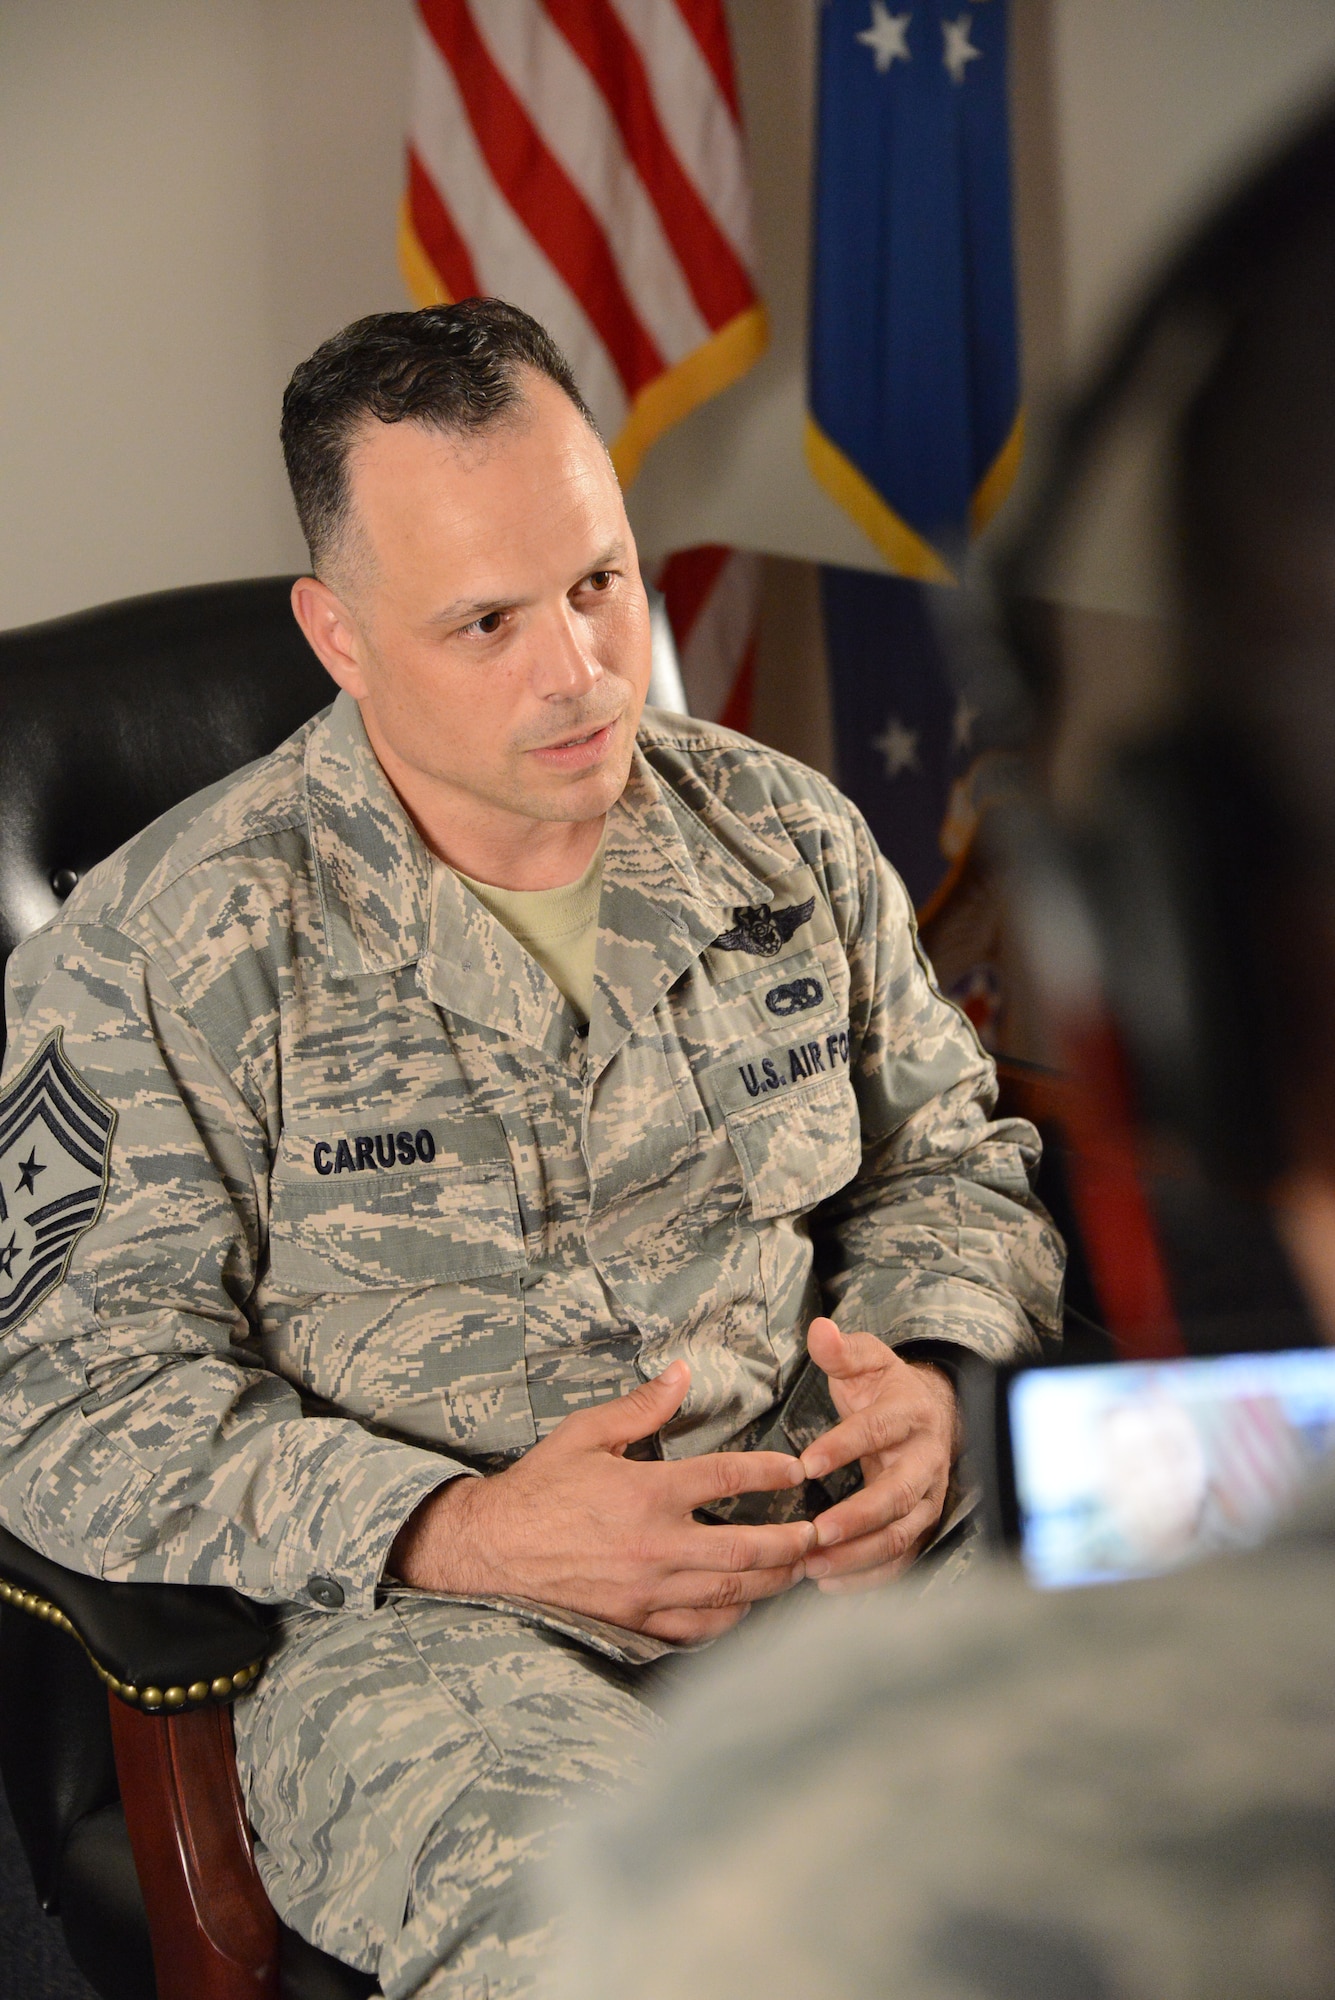 Chief Master Sgt. Matthew Caruso, the eighth Air Force Special Operations Command command chief, responds to questions May 12, 2014, in his first interview as the "senior sergeant" for the command. He returned to Hurlburt Field for his new job after recent posts at Cannon Air Force Base, N.M., and Bagram Air Base Afghanistan, and a tour in the Republic of Korea. (Air Force photo by Master Sgt. Steven Pearsall)
